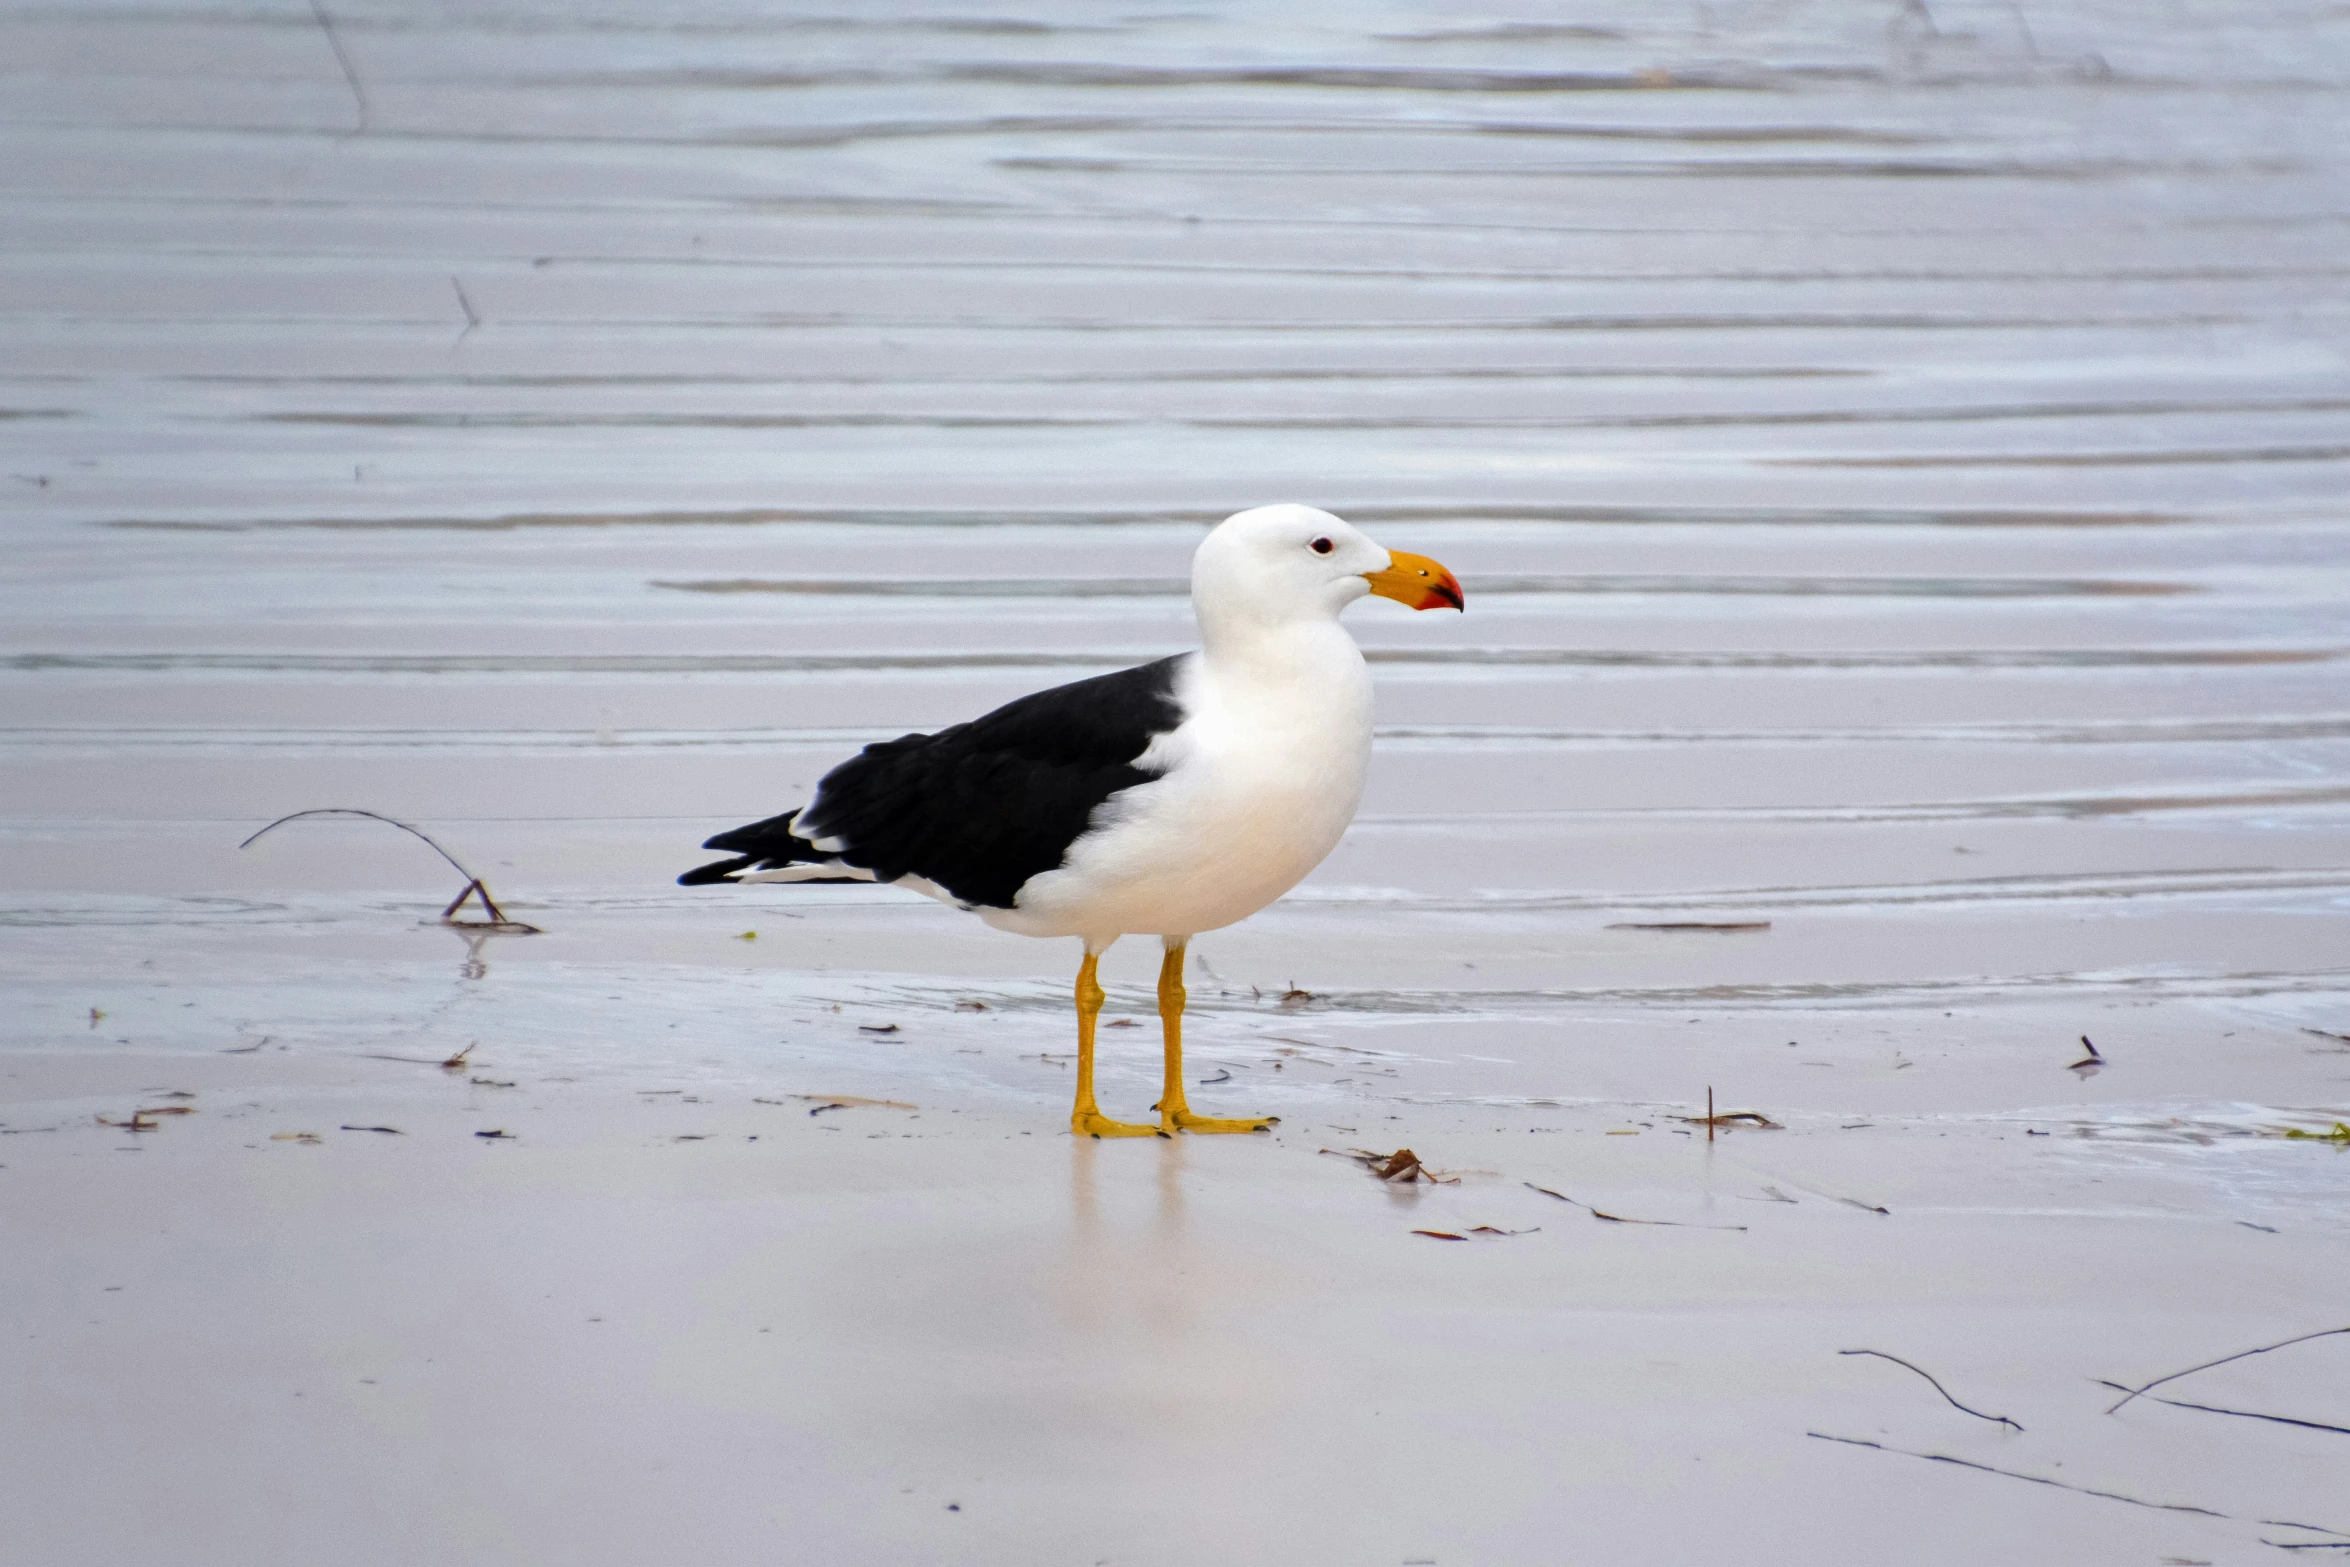 a seagull stands on the beach with its head slightly hidden